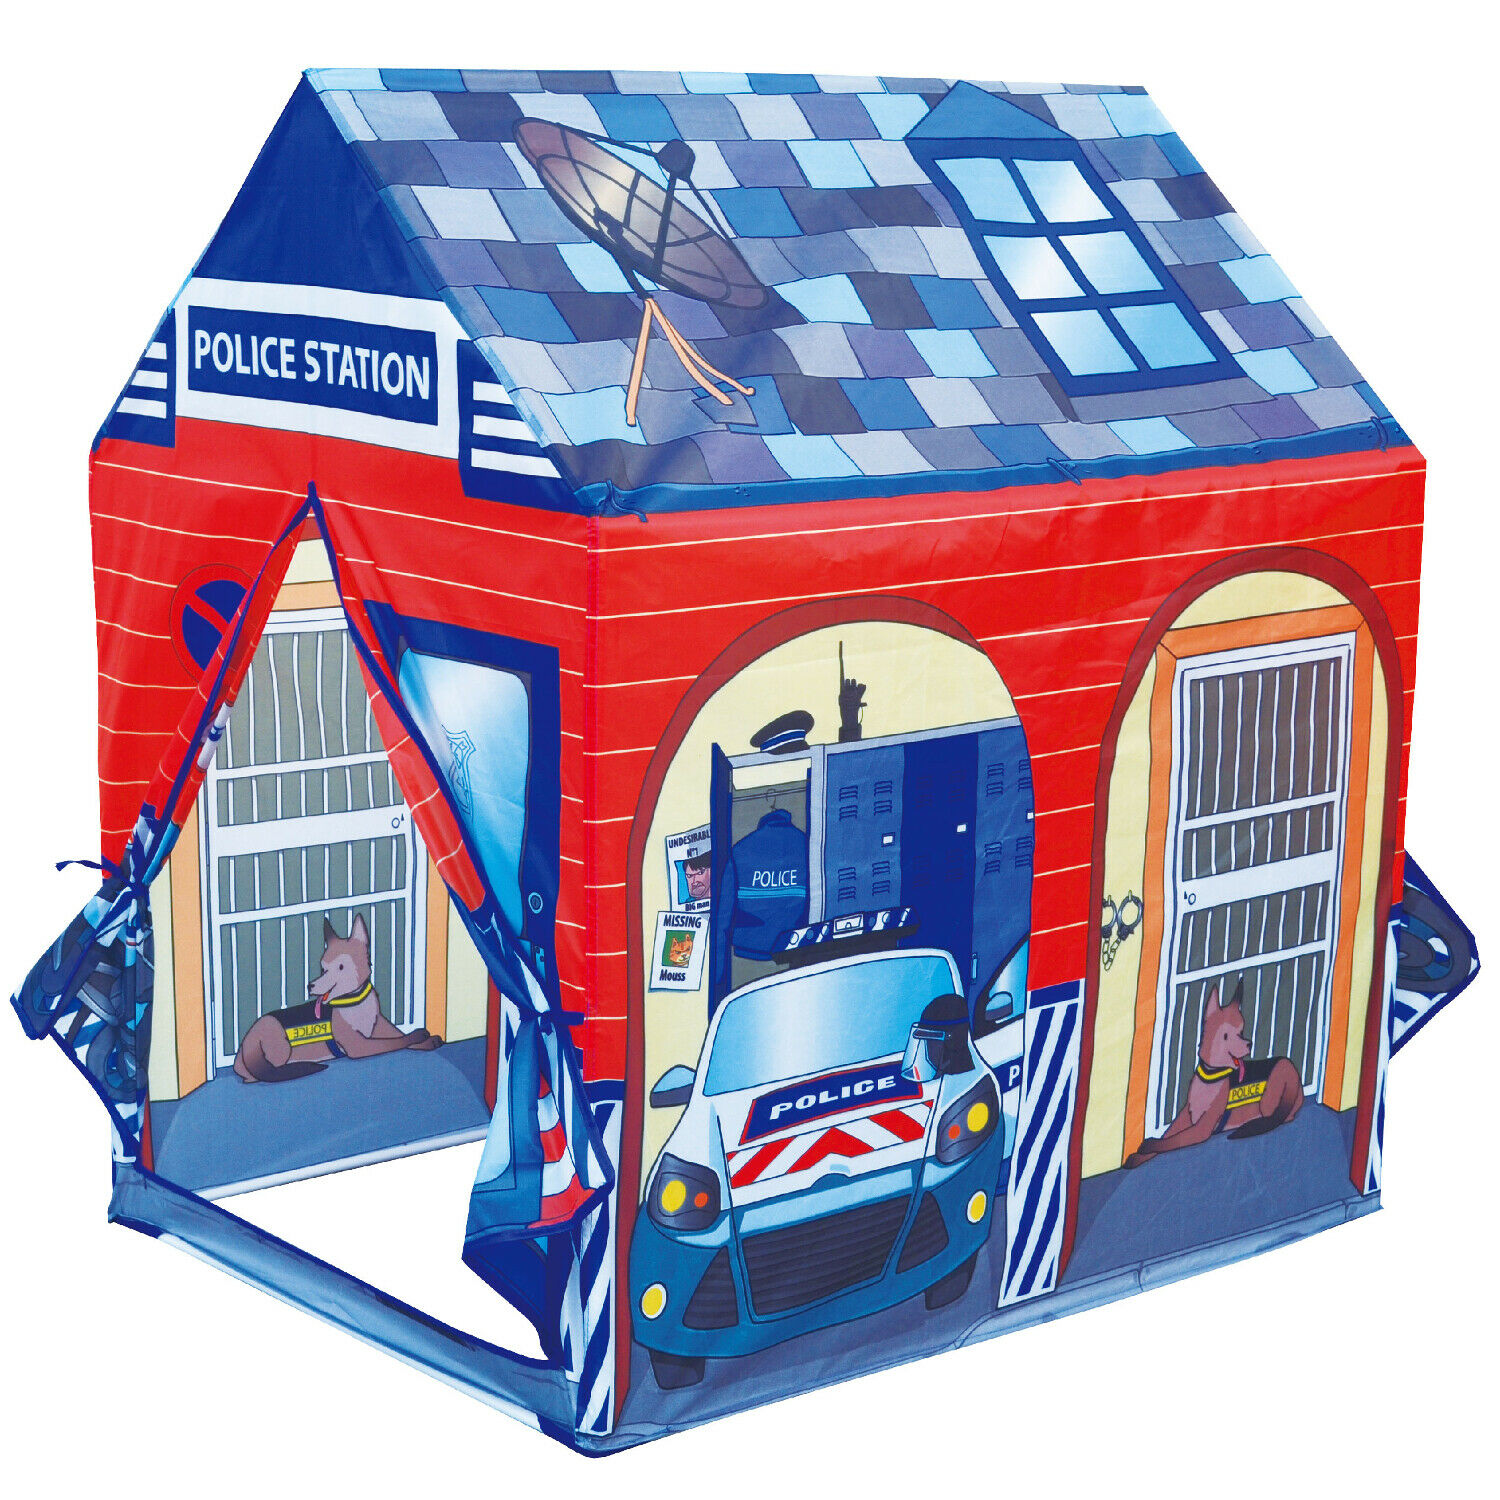 Police Station Play Tent Kids Pretend Super Hero Playhouse Children Toy Castle